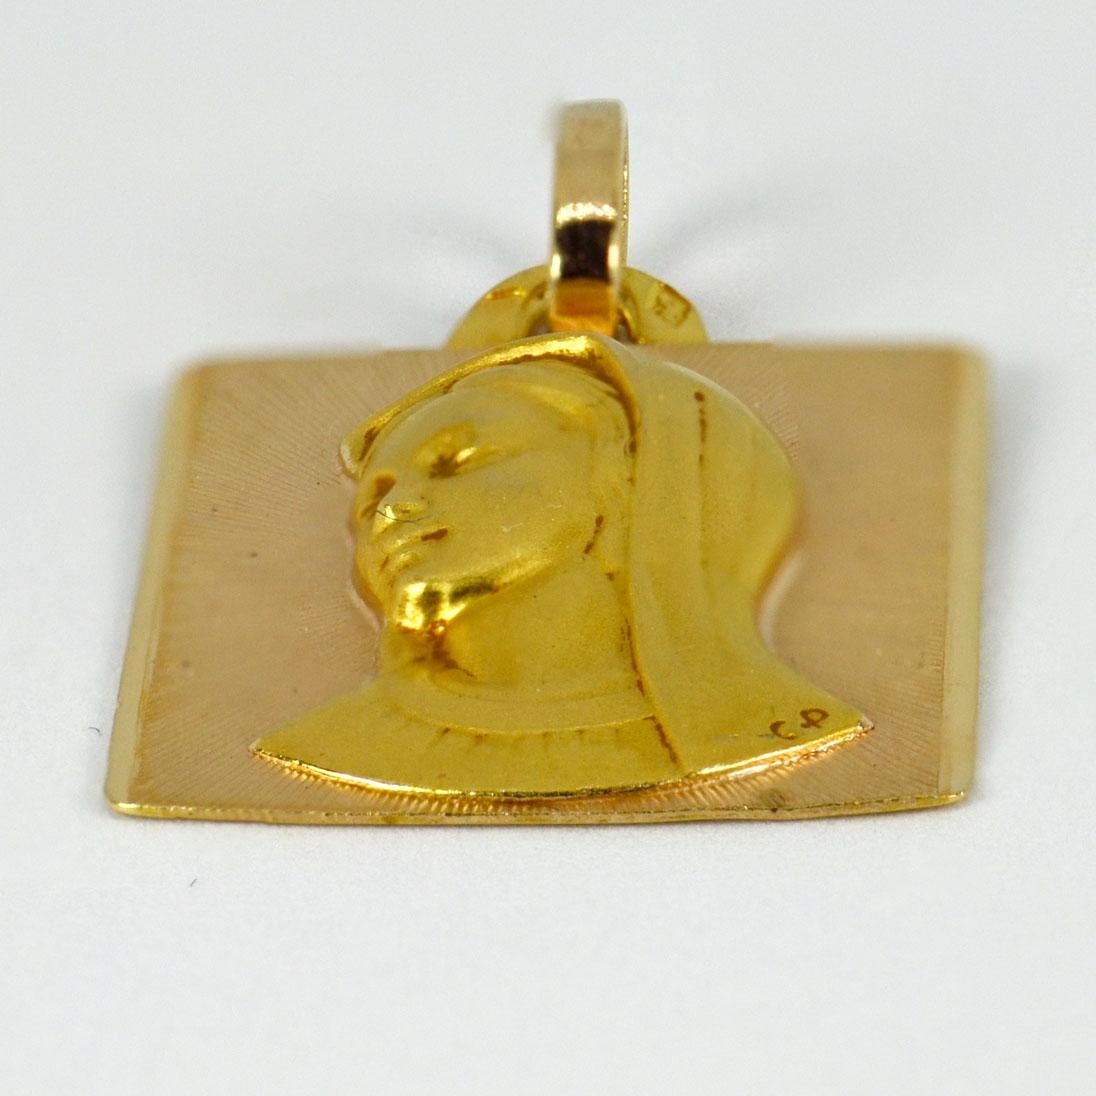 An 18 karat (18K) yellow gold pendant designed as a rectangular medal depicting the Virgin Mary. Signed C.P. Stamped with the eagle’s head for French manufacture and 18 karat gold, with unknown maker’s mark.

Dimensions: 2.5 x 1.8 x 0.35 cm (not